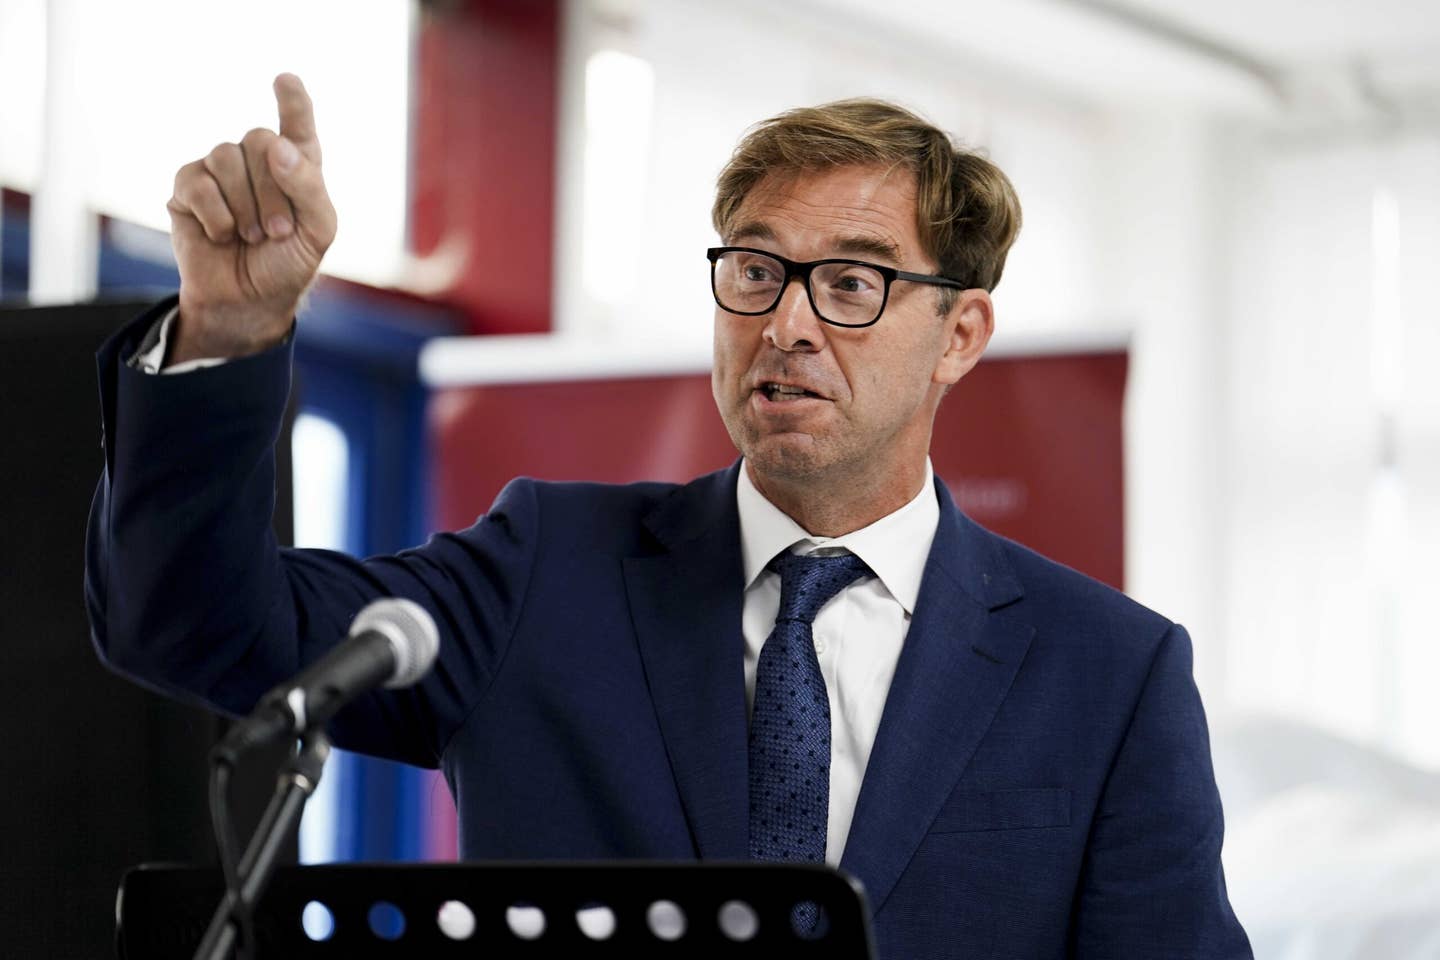 Tobias Ellwood speaking at an event organised by the Afghanistan and Central Asian Association (ACAA) in Feltham, U.K., August 15, 2023. <em>Photo by Jordan Pettitt/PA Images via Getty Images</em>